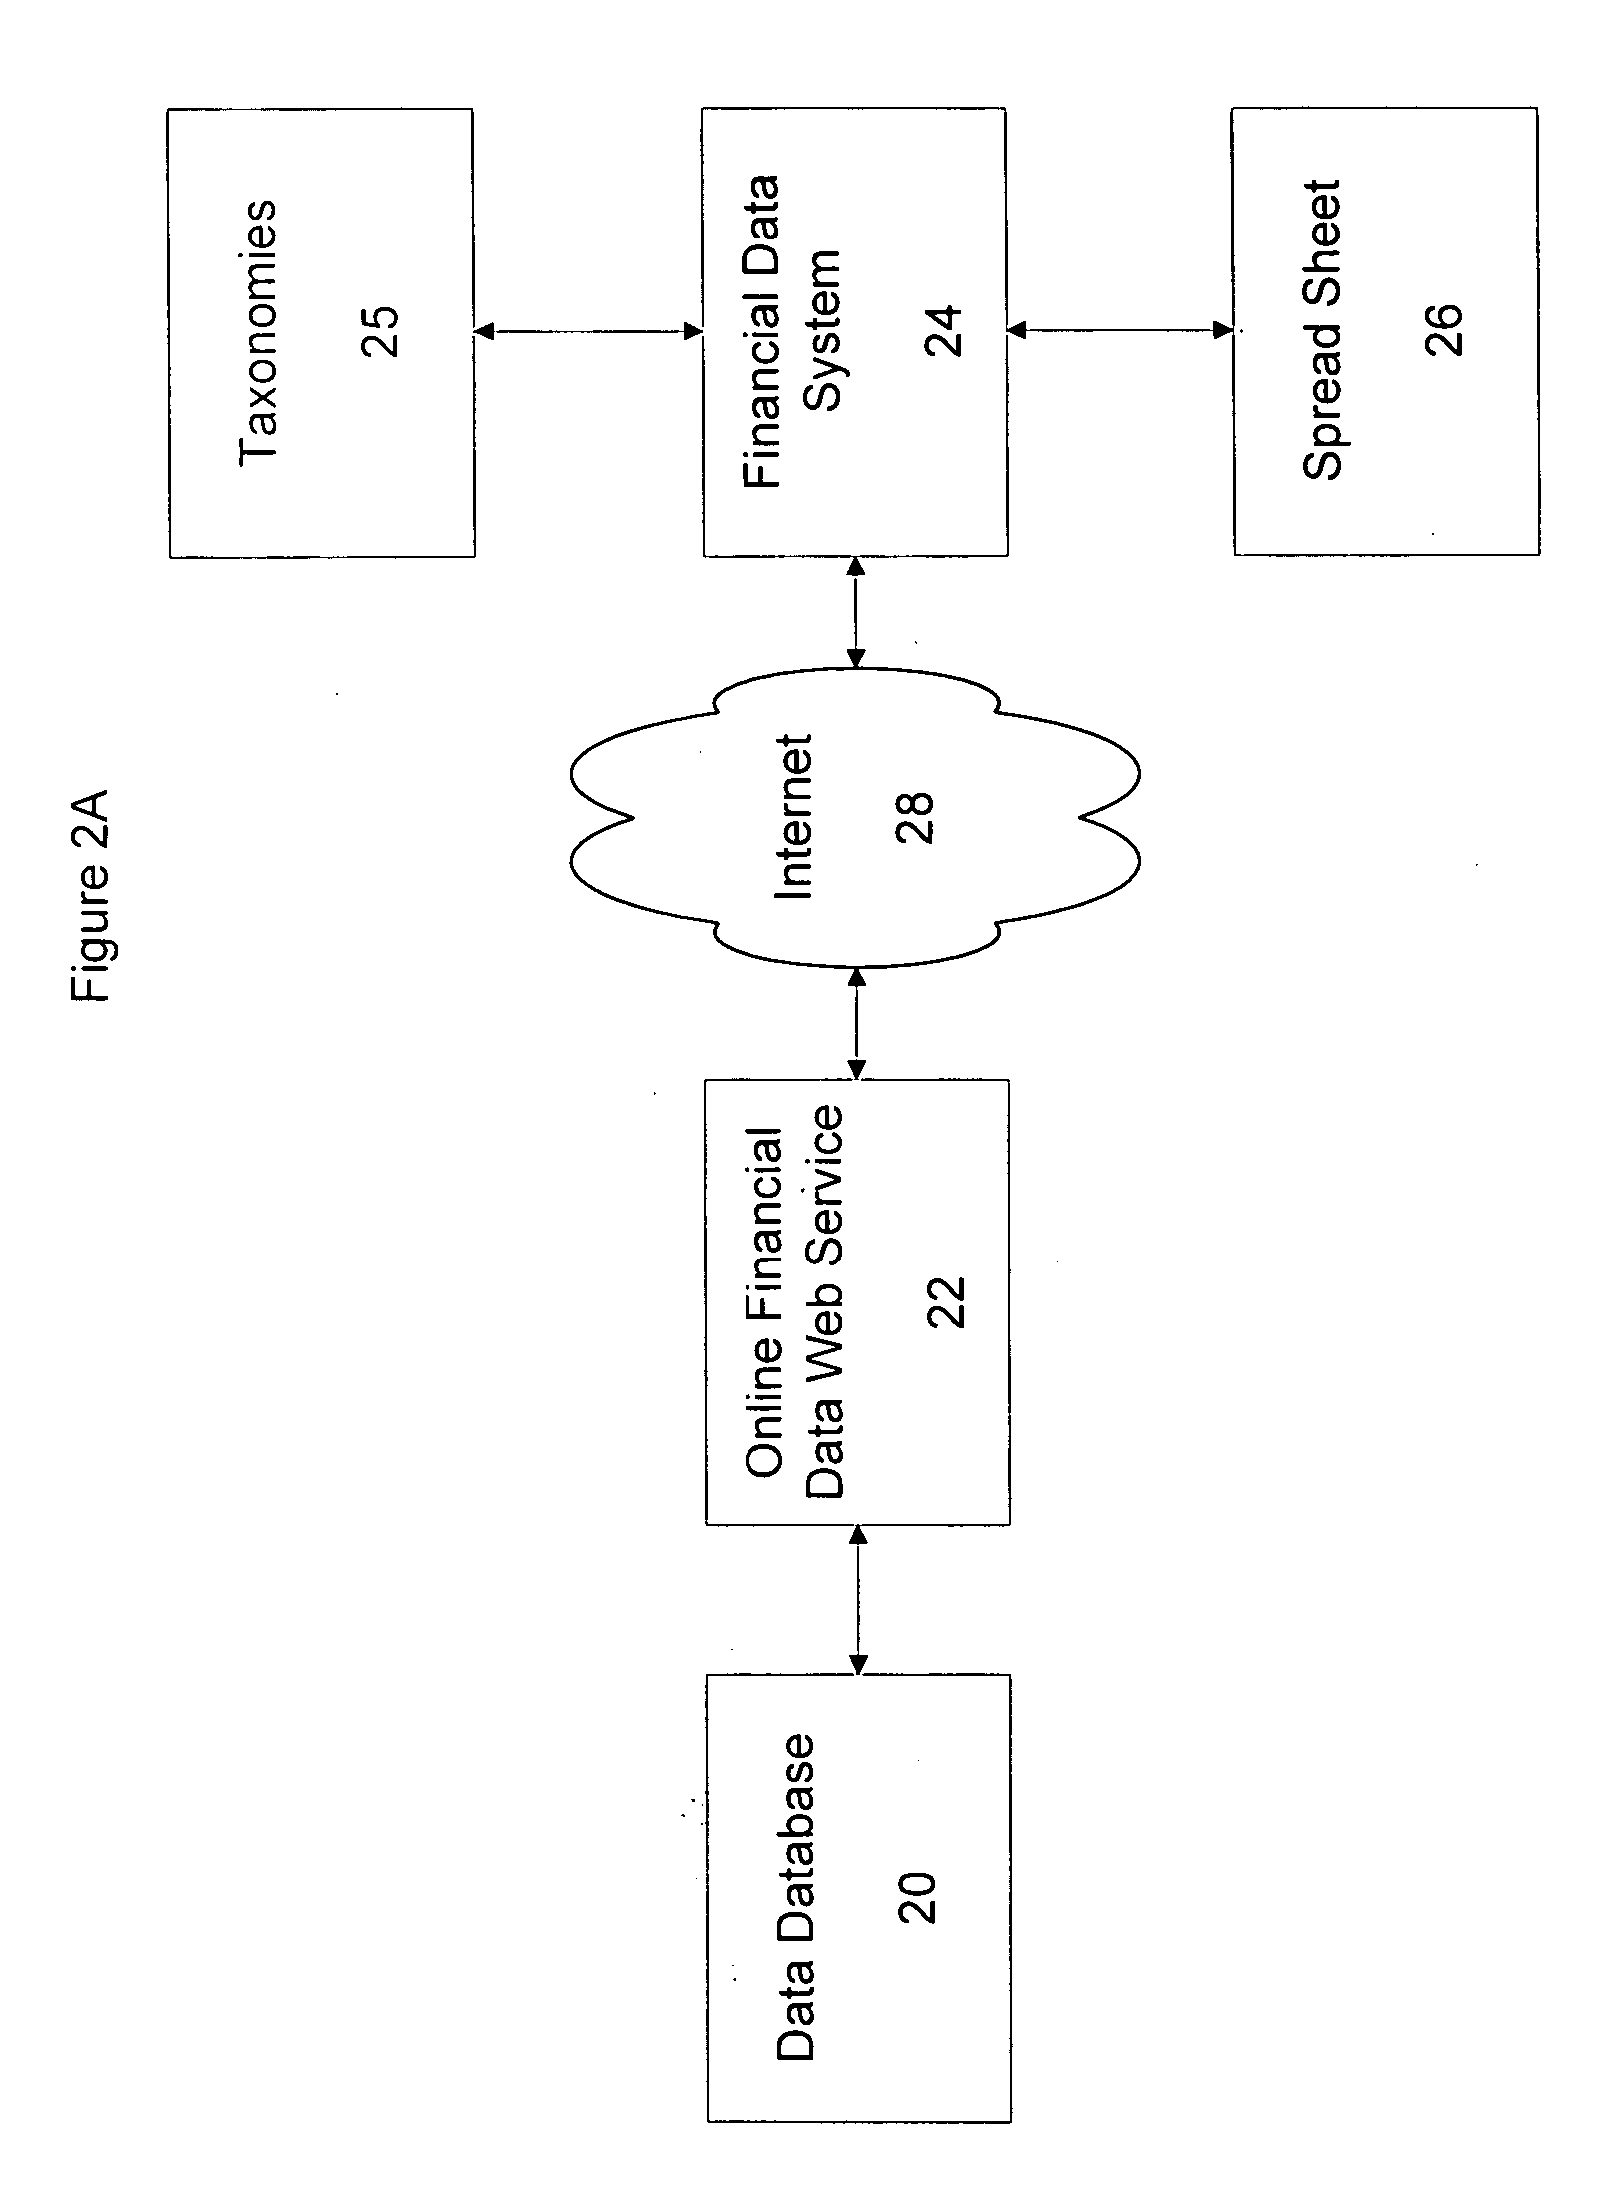 System and method for rendering of financial data